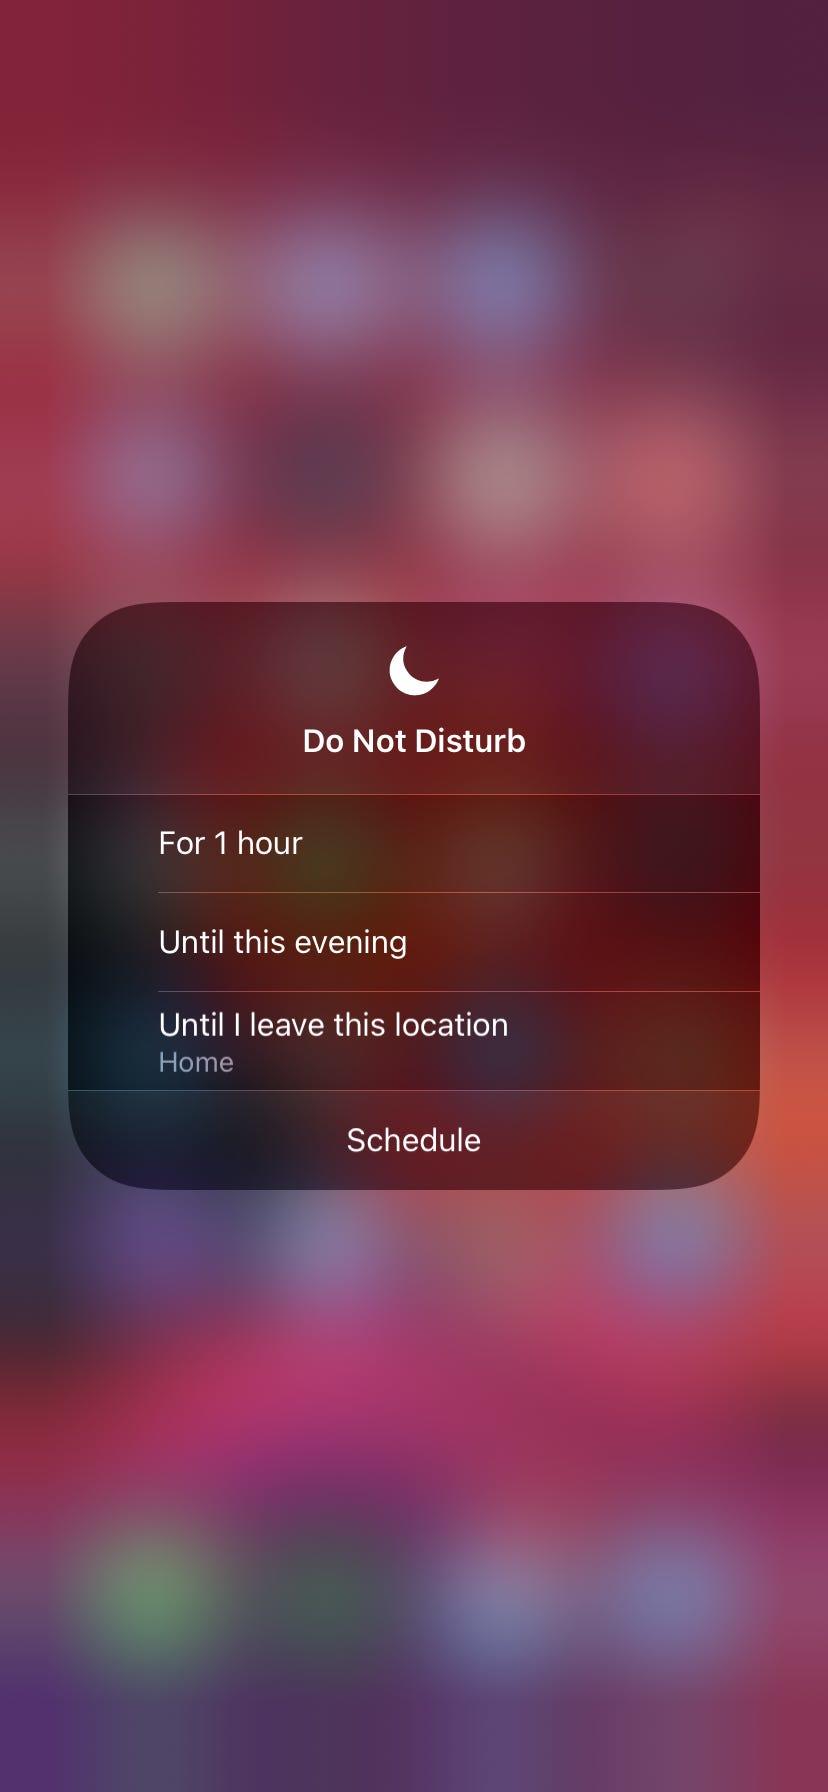 find my iphone turn off notifications